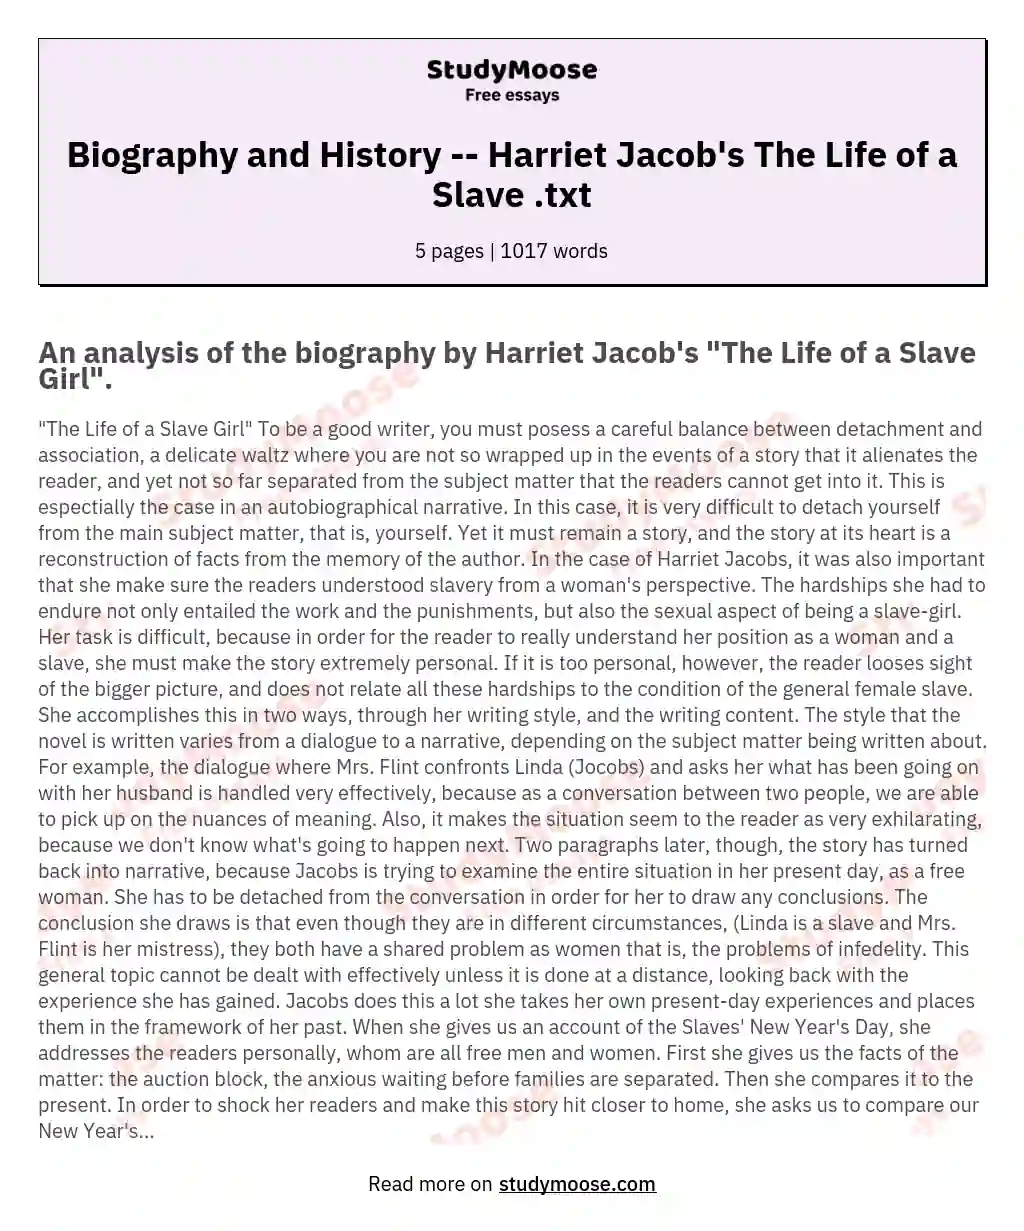 Biography and History -- Harriet Jacob's The Life of a Slave .txt essay